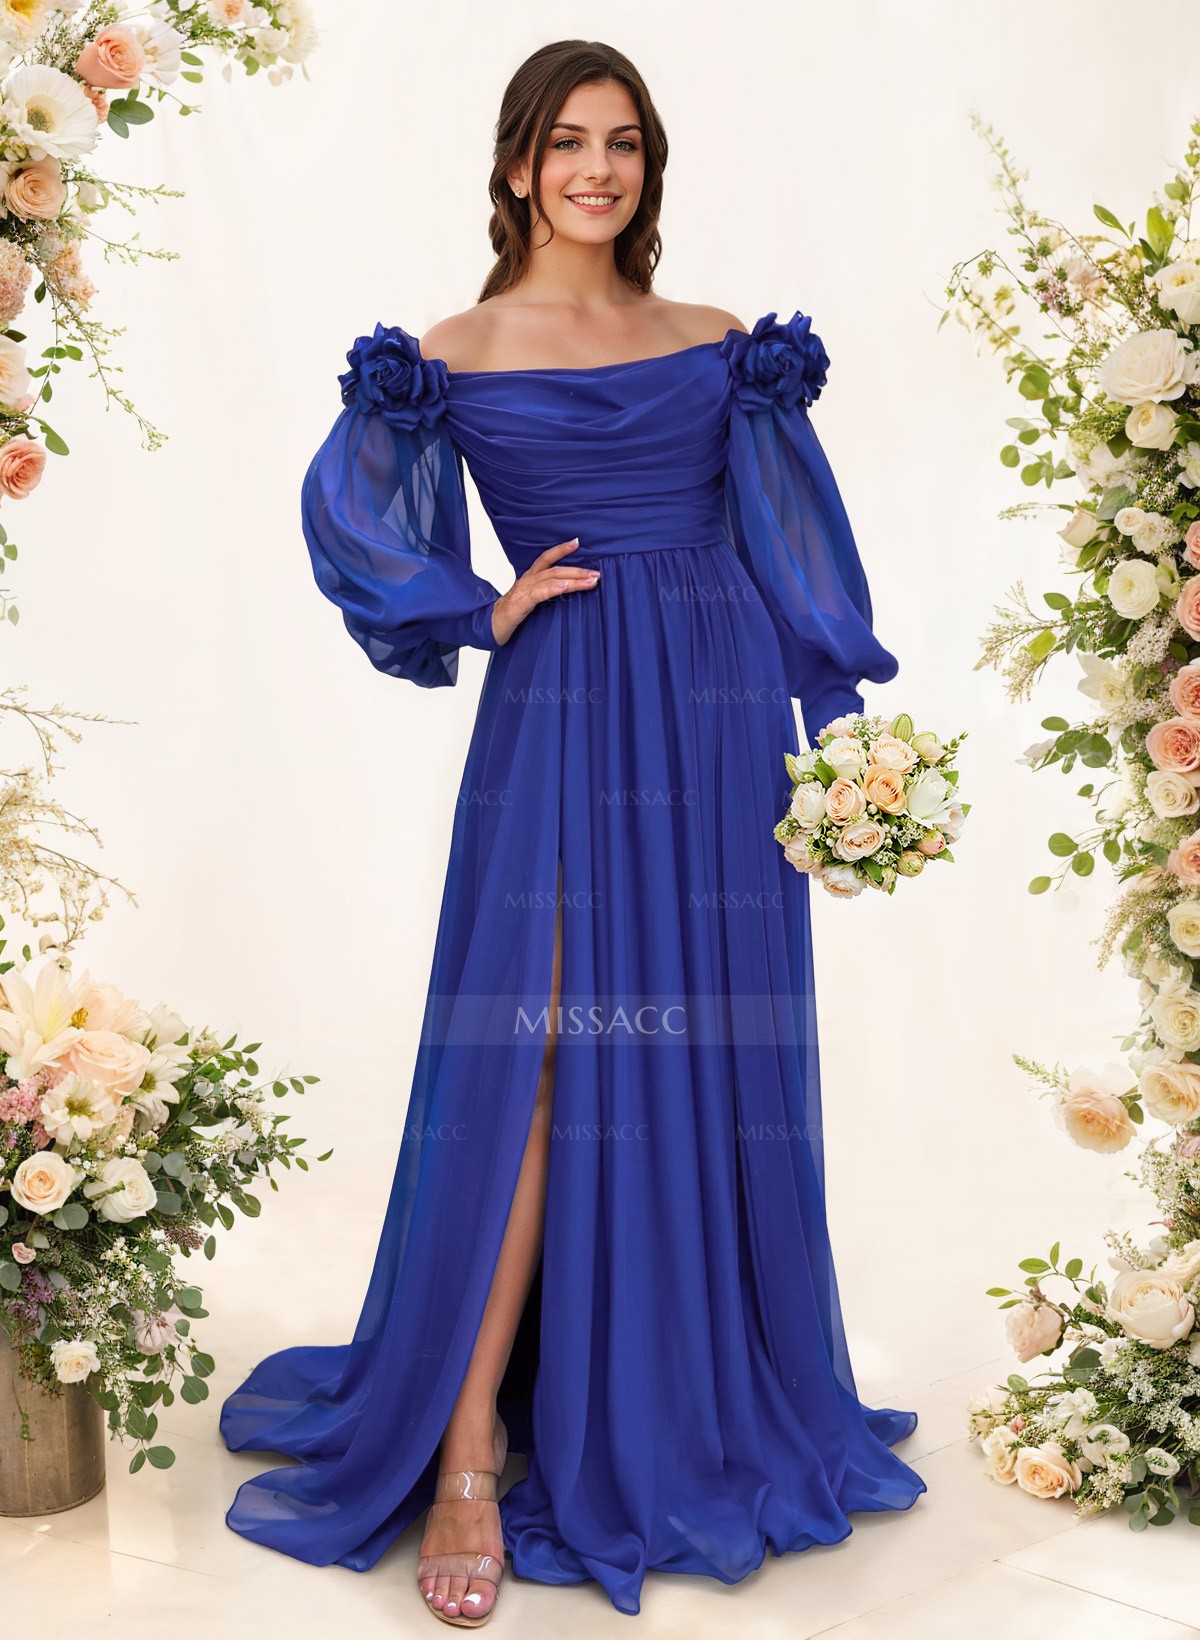 A-Line Off-The-Shoulder Long Sleeves Chiffon Bridesmaid Dresses With Flower(s)